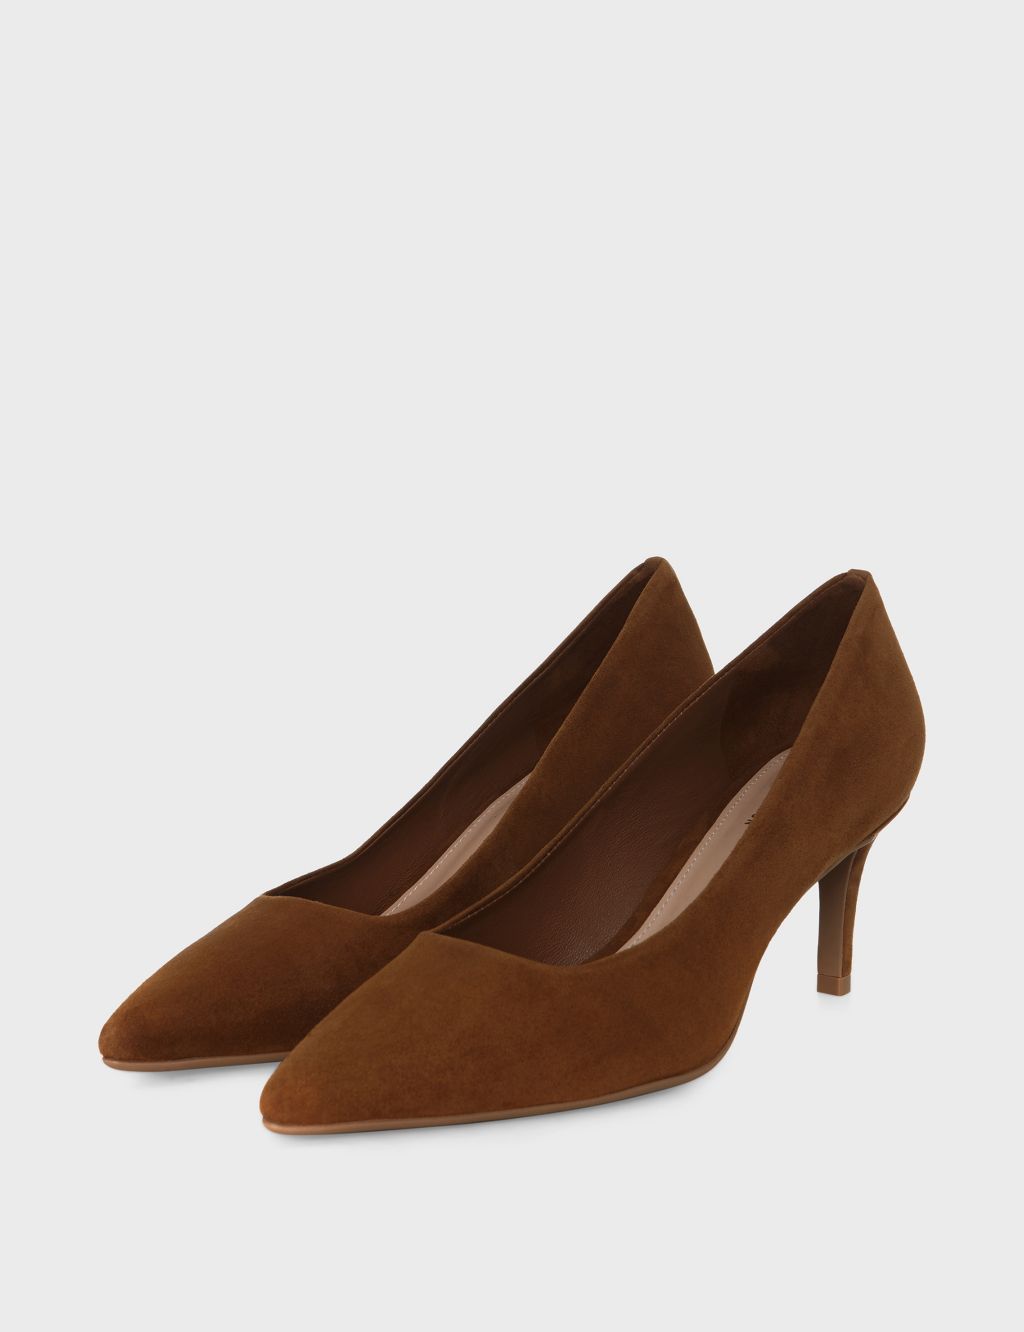 Suede Kitten Heel Pointed Court Shoes image 2